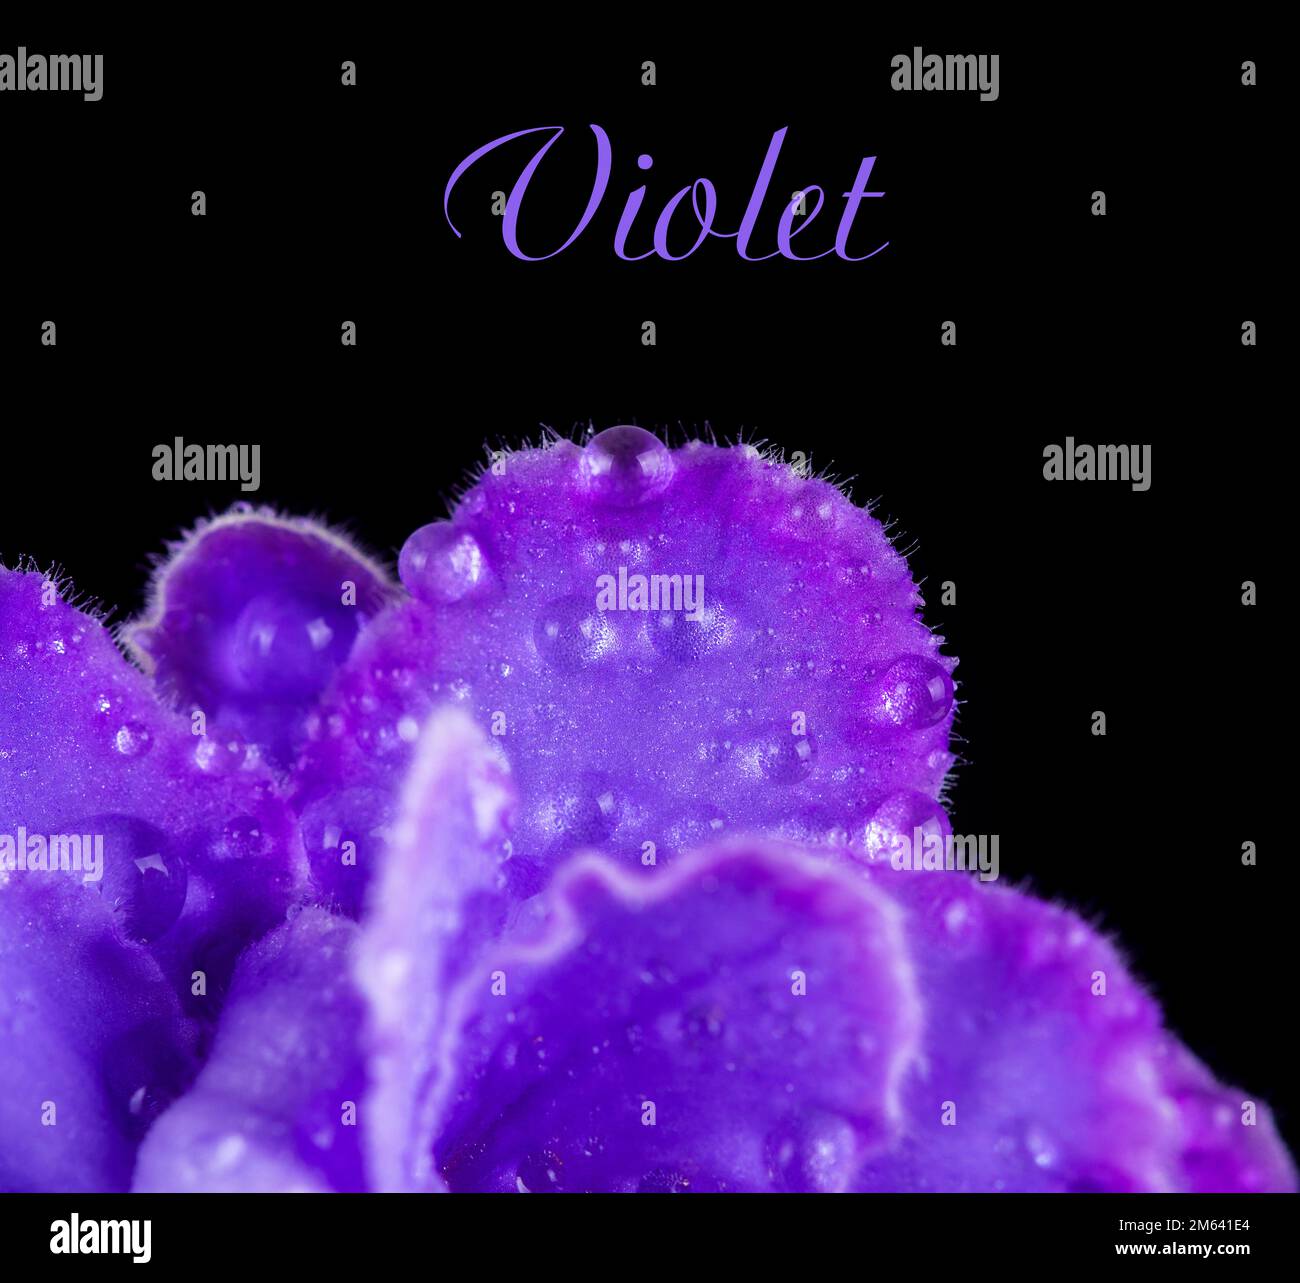 Violet petals with drops on a black background close up. Stock Photo